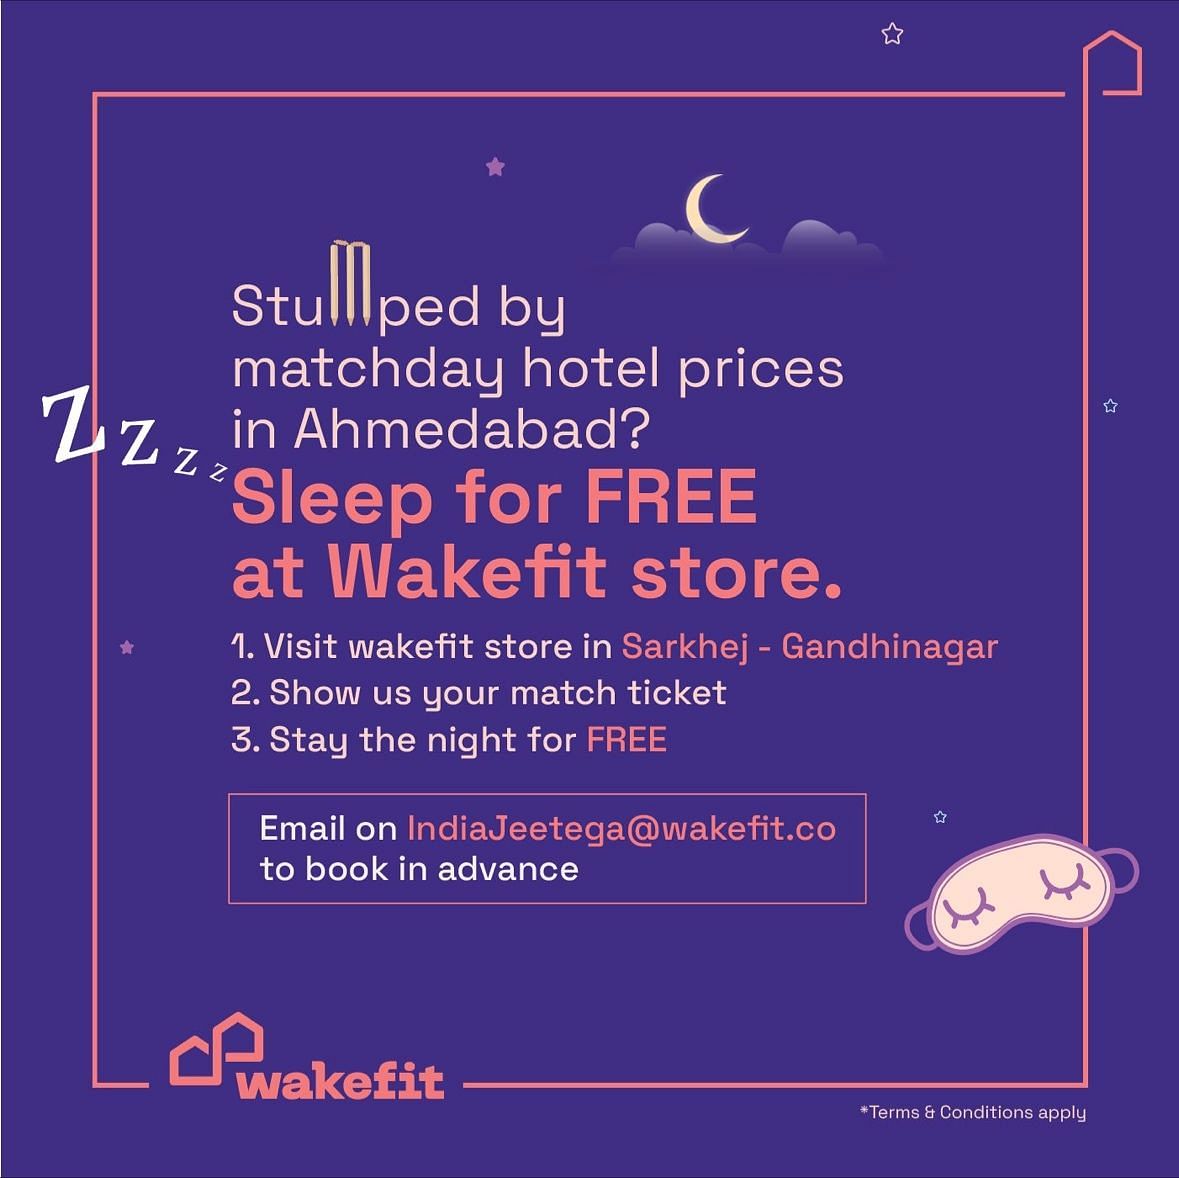 Amidst surge in hotel prices in Ahmedabad due to World Cup final, Wakefit offers free accommodation